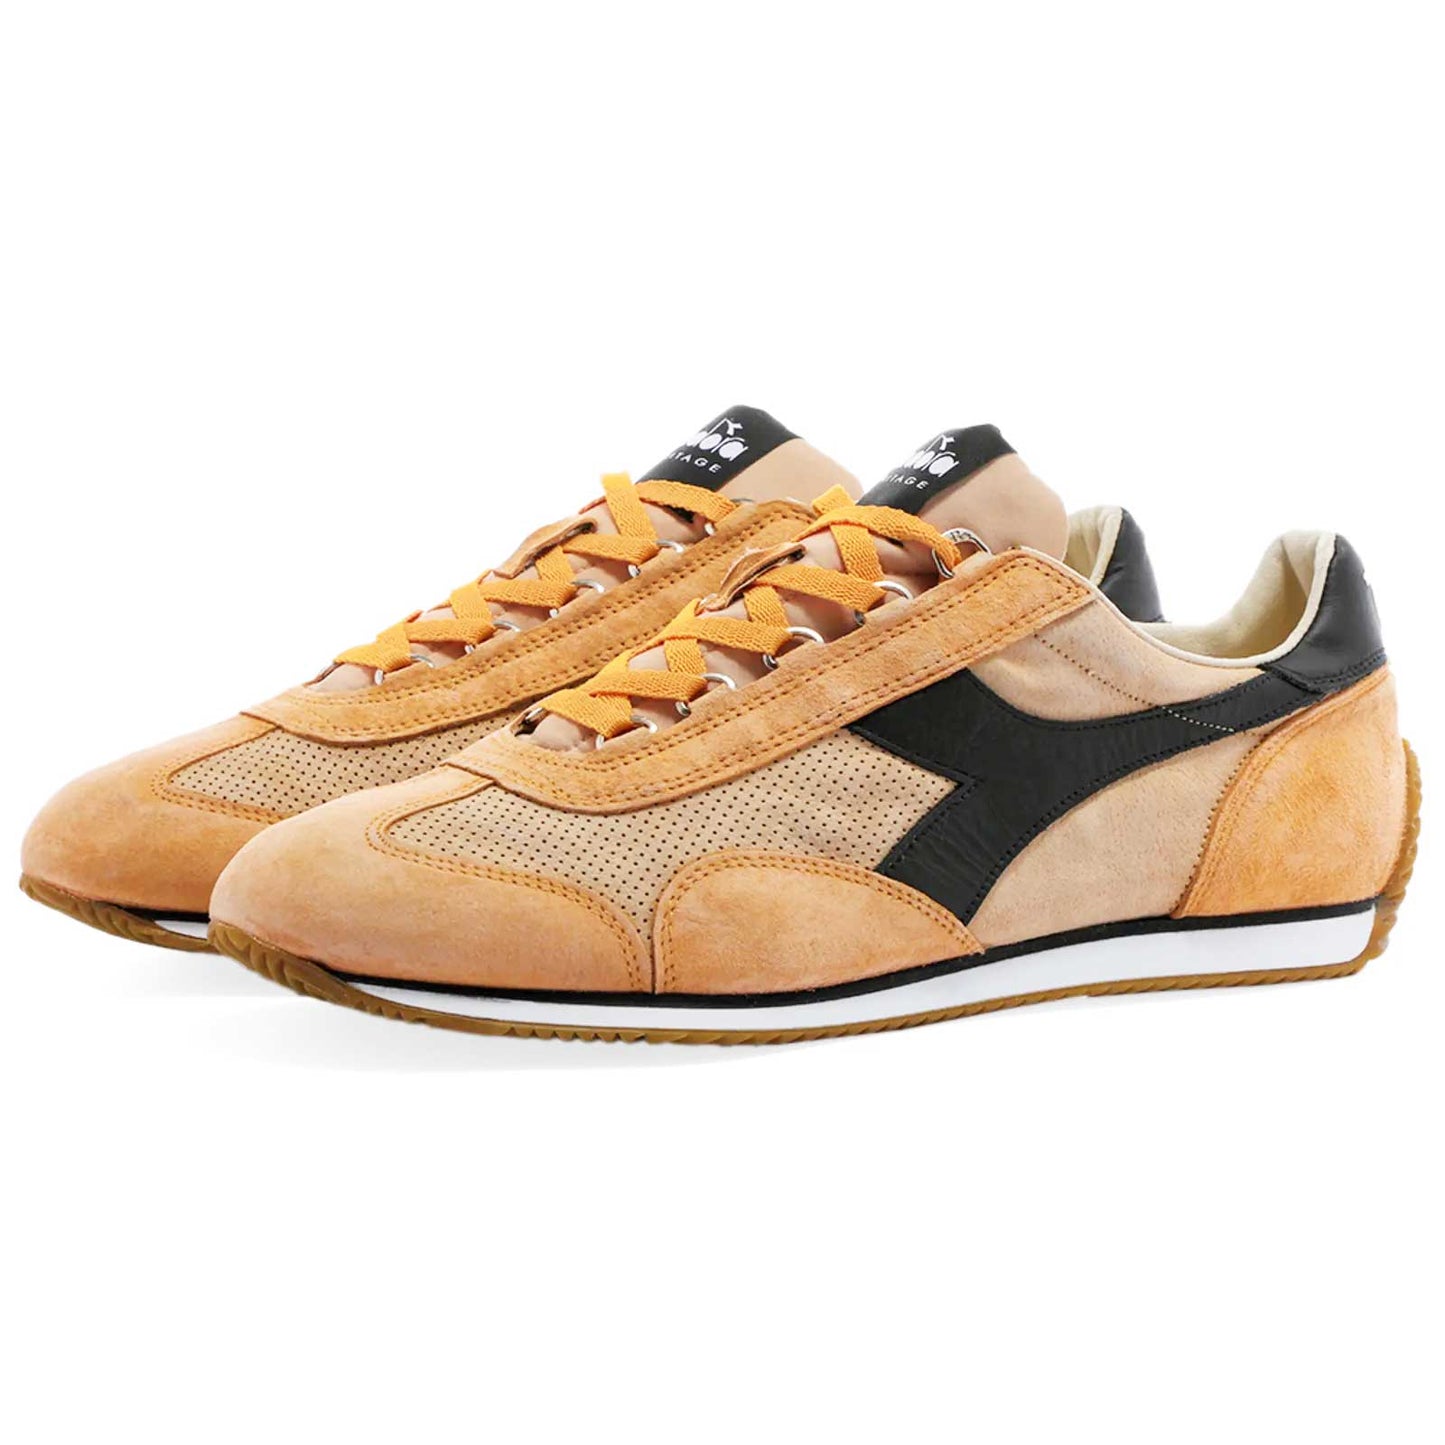 Diadora Heritage Equipe Retro Running Shoes Desert Mist New Men's Sneakers Size 11 Made in Italy